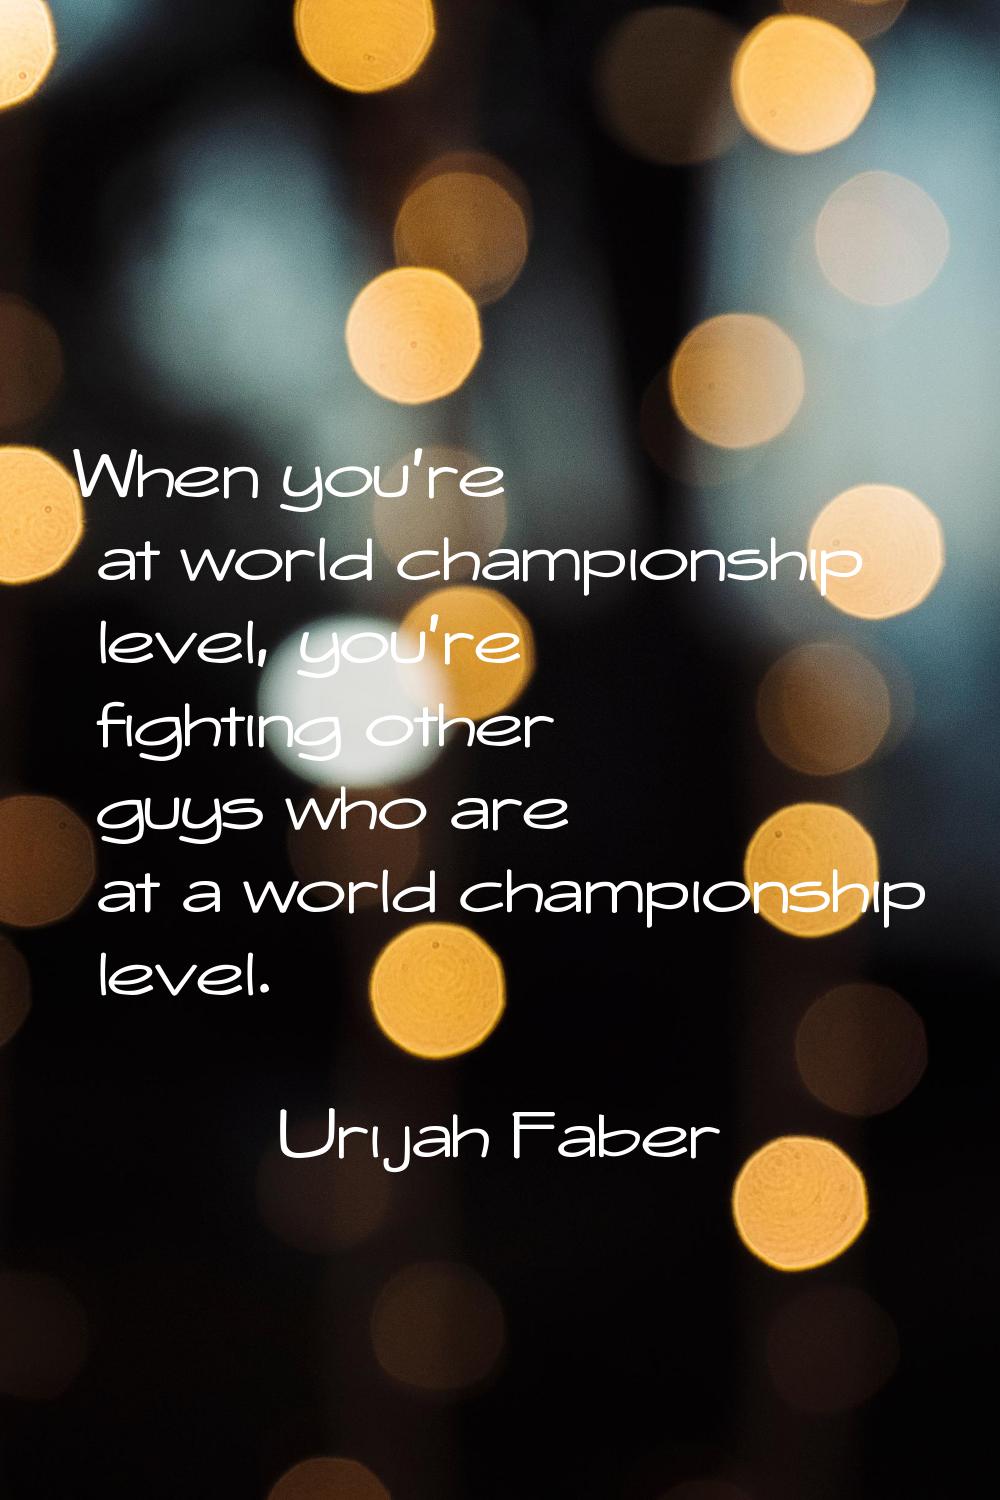 When you're at world championship level, you're fighting other guys who are at a world championship